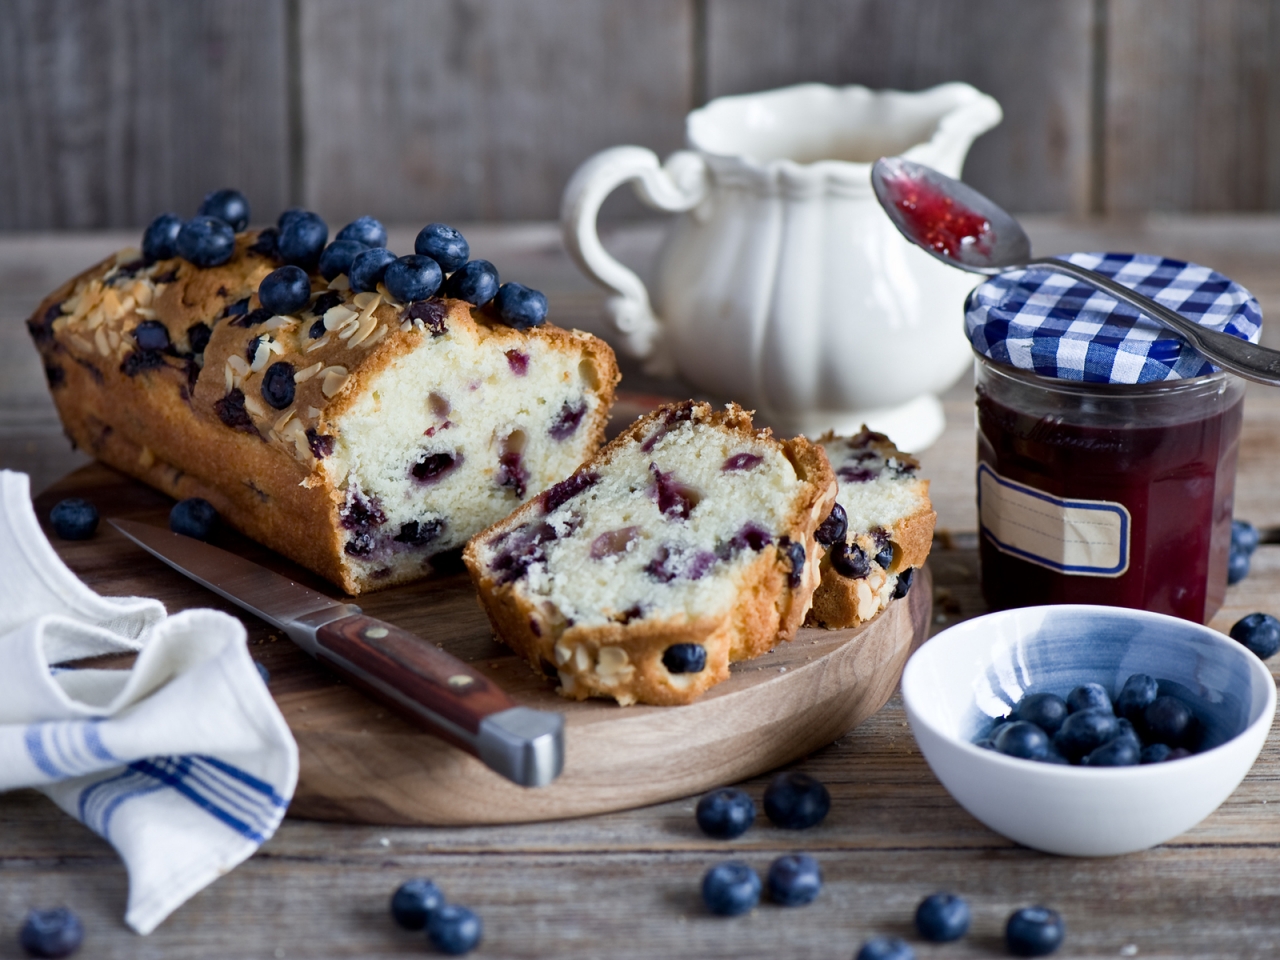 Blueberries Cake for 1280 x 960 resolution